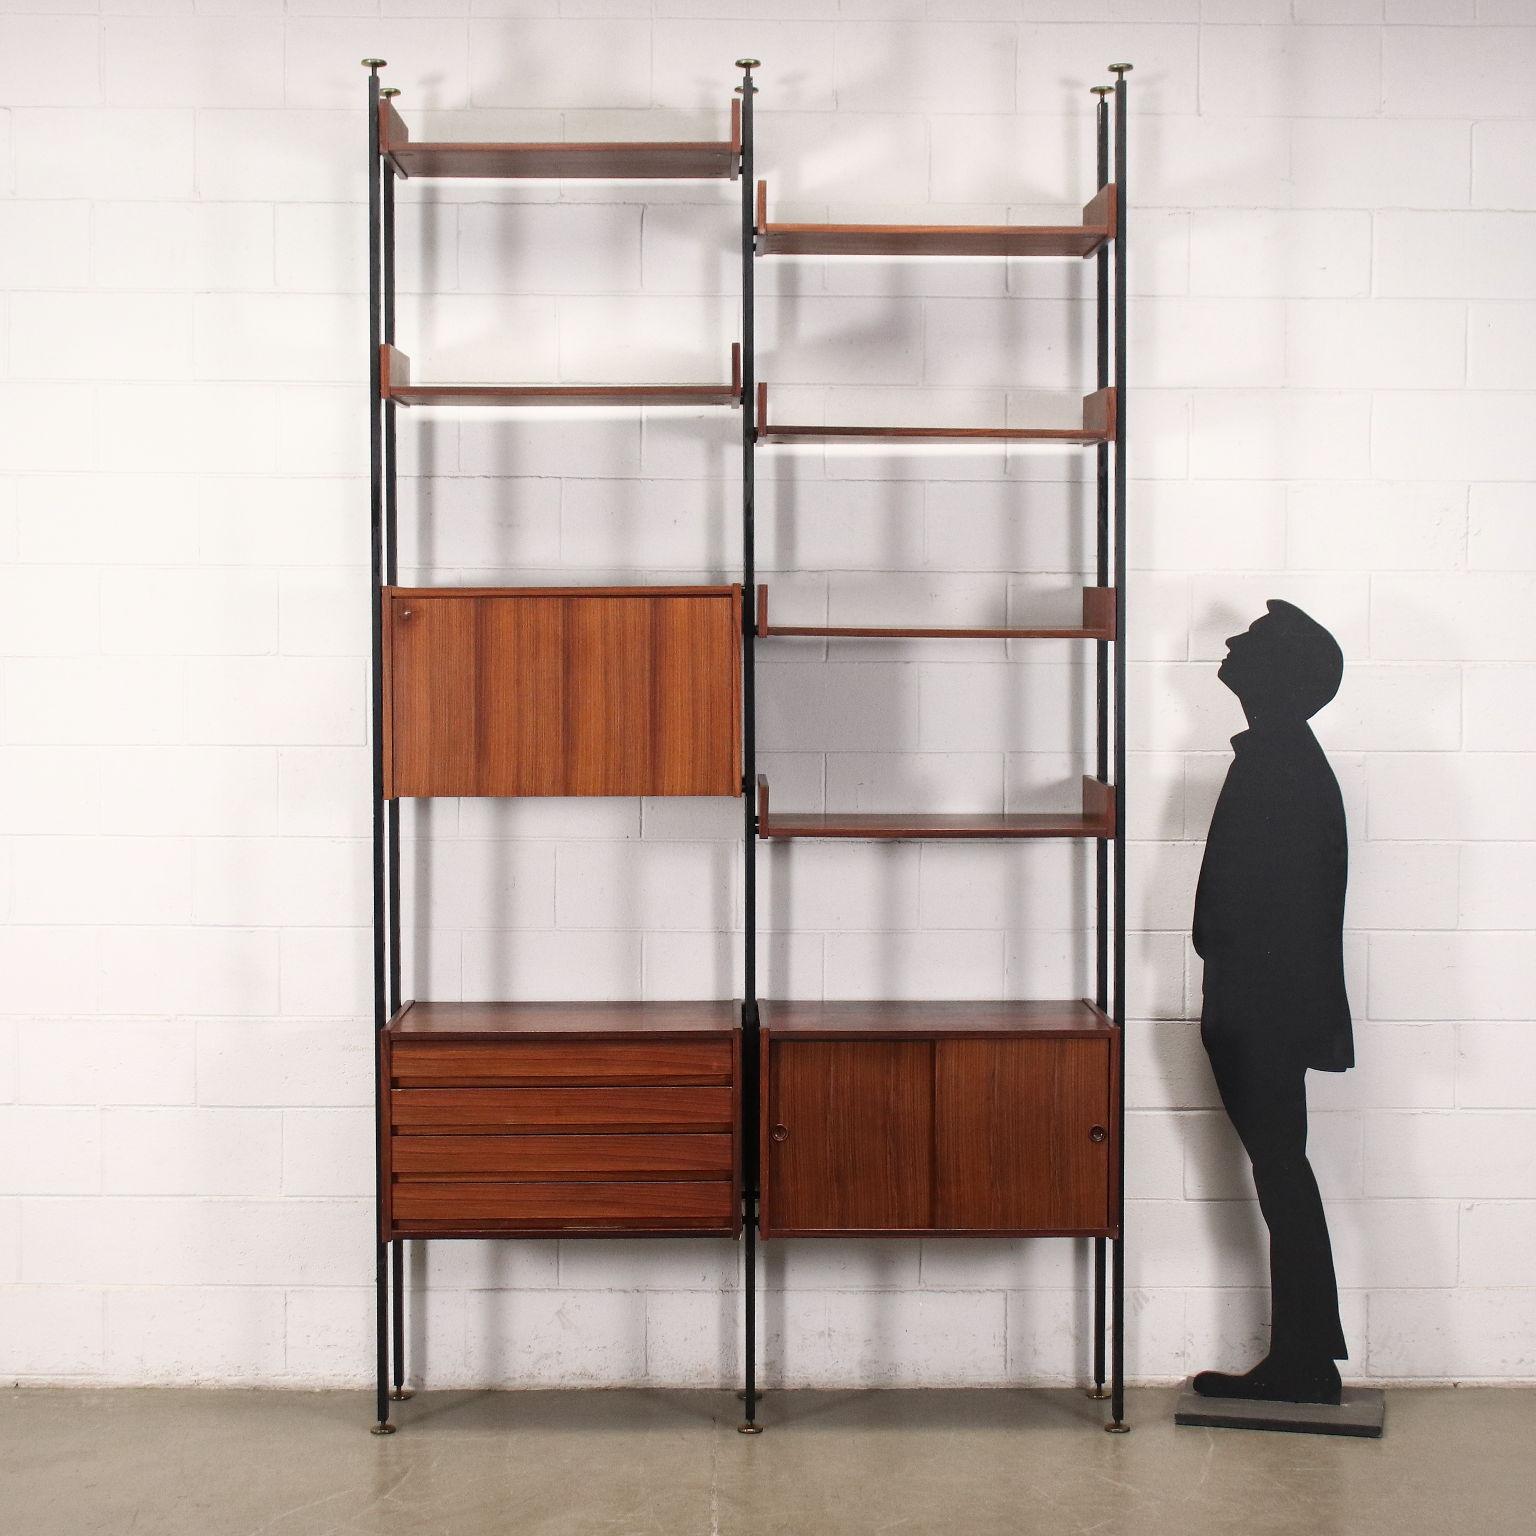 Freestanding bookcase from the 1950s-60s with storage compartments and adjustable shelves. In veneered wood, it has metal uprights.